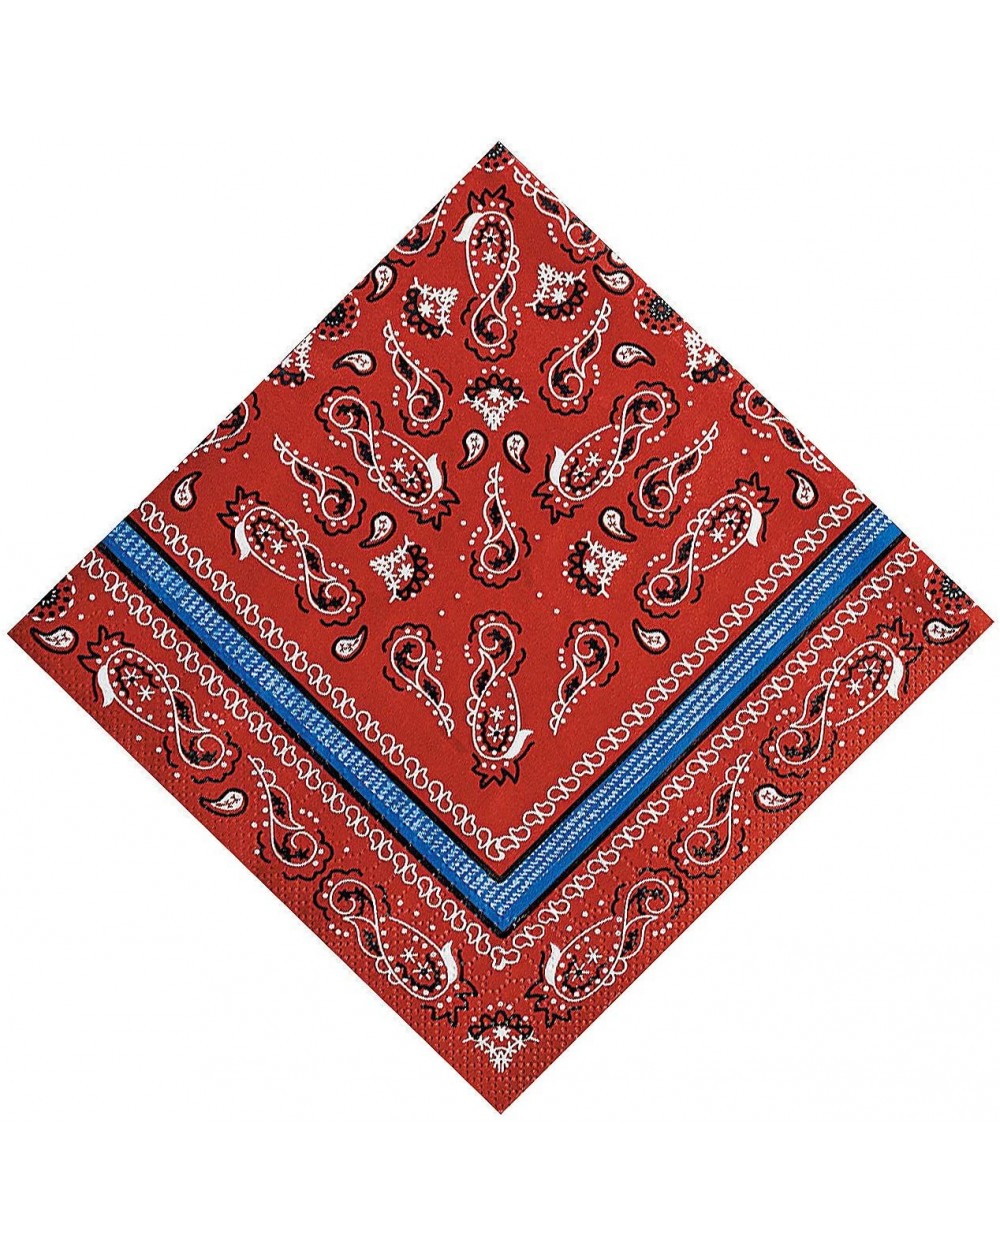 Tableware Red Bandana Lunch Napkins - Party Supplies - Print Tableware - Print Napkins - 16 Pieces - CY11BGAO59L $12.00